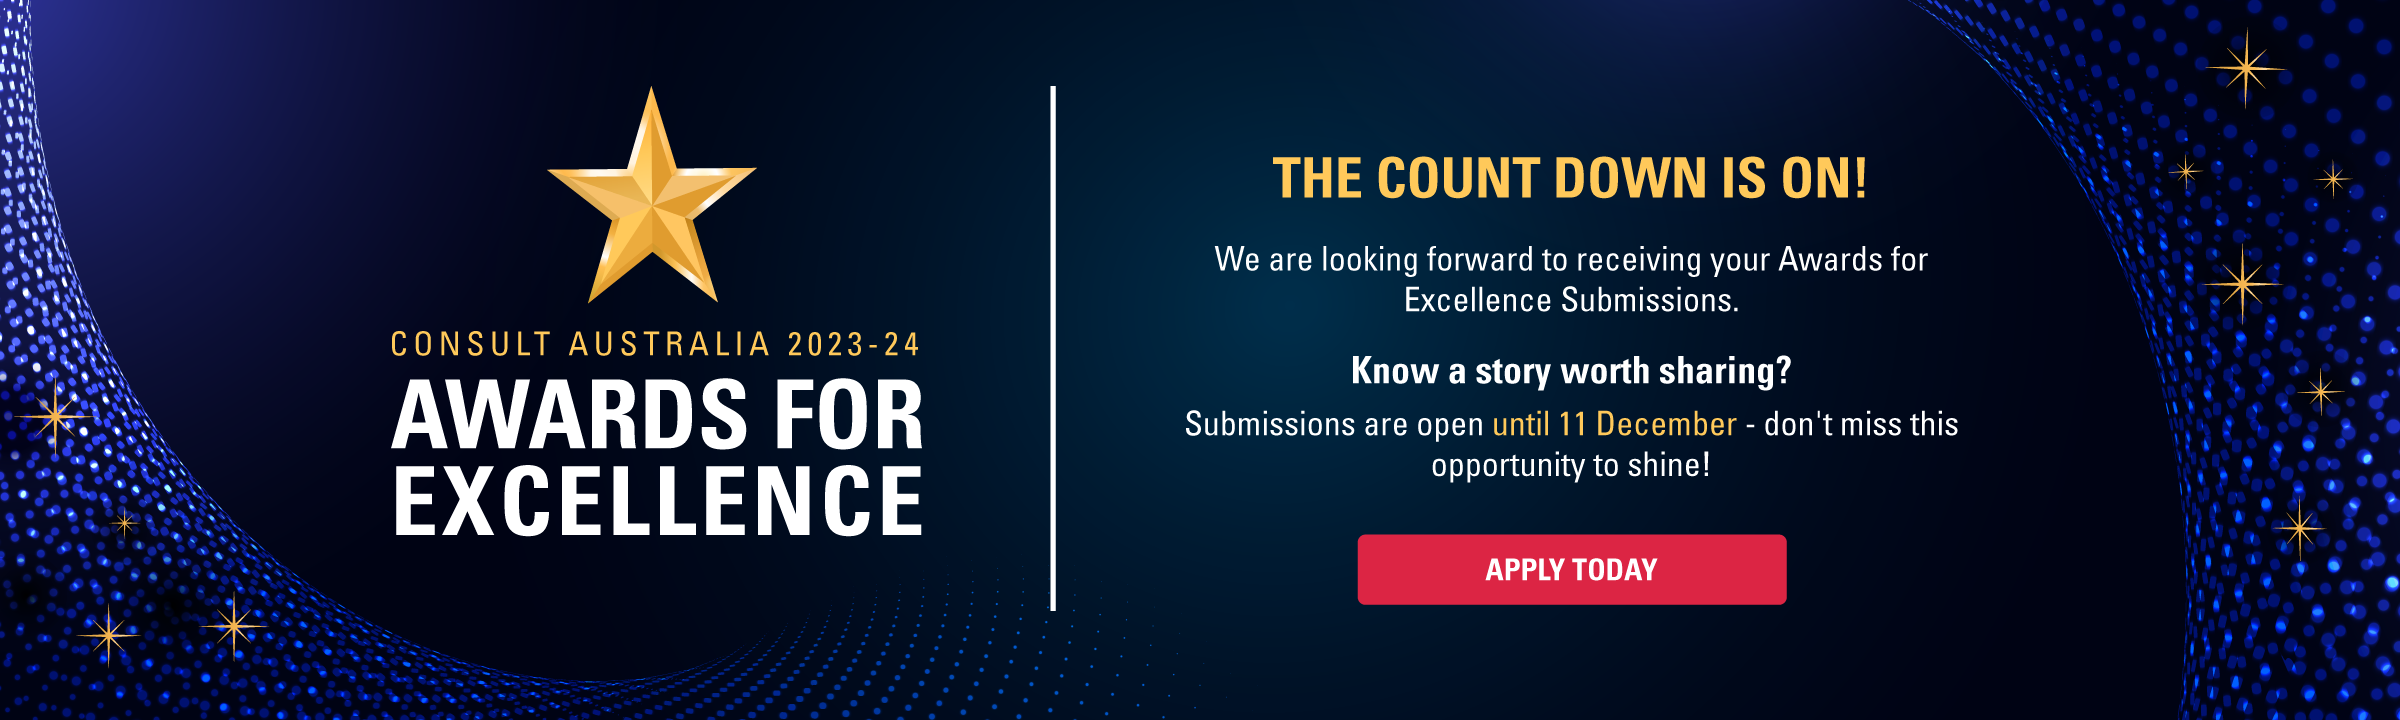 Consult Australia 2023-24 Awards for Excellence - Apply today 